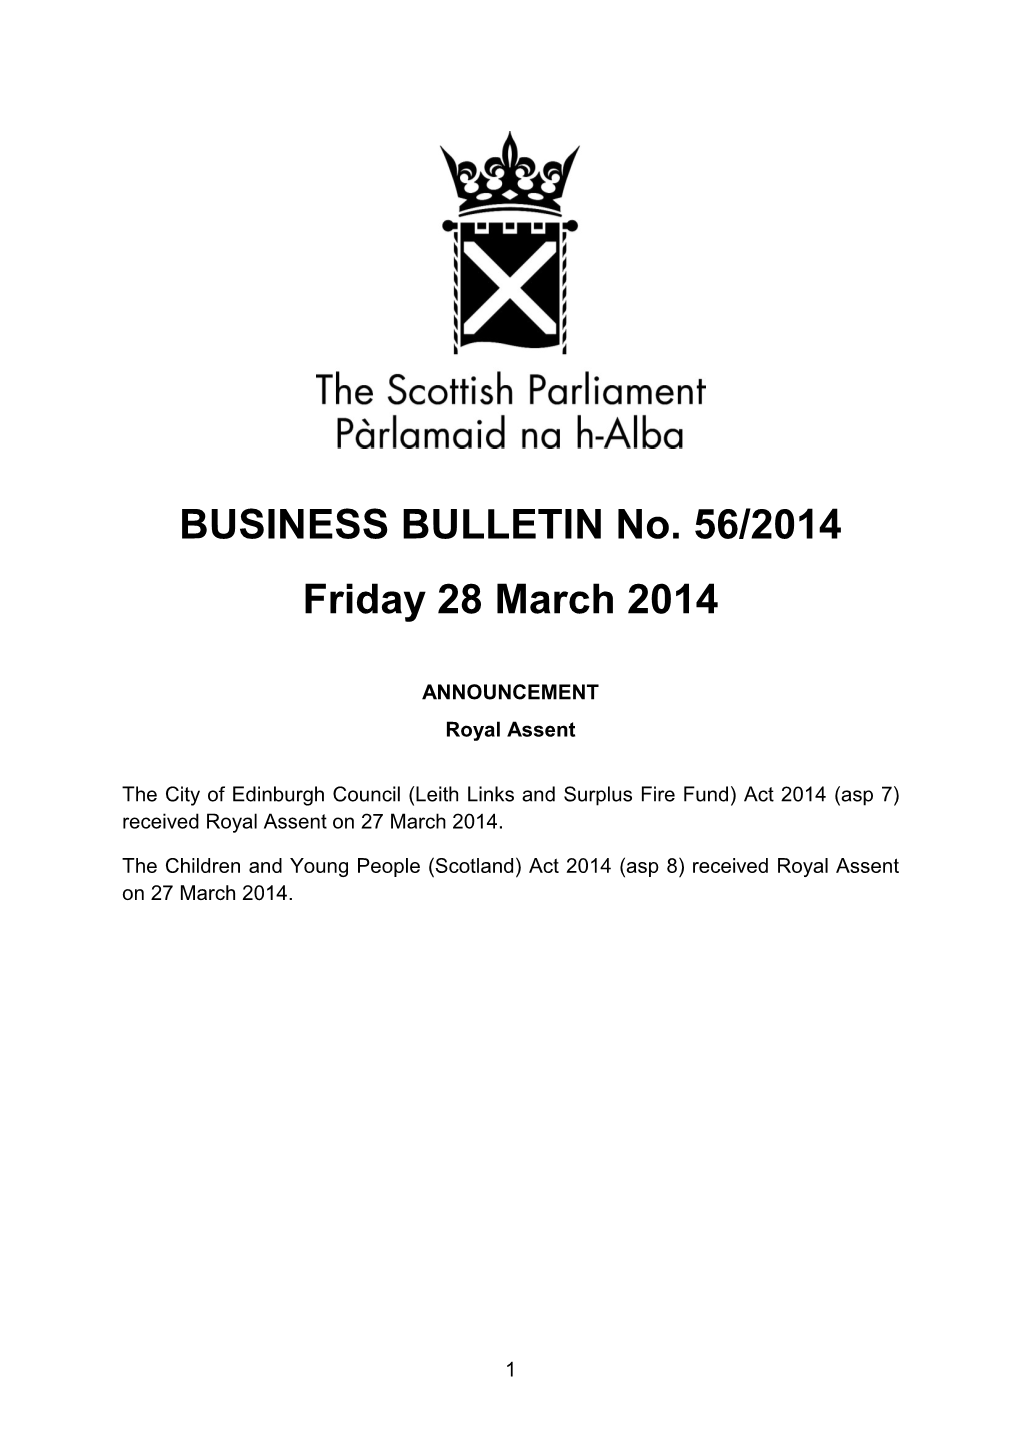 BUSINESS BULLETIN No. 56/2014 Friday 28 March 2014